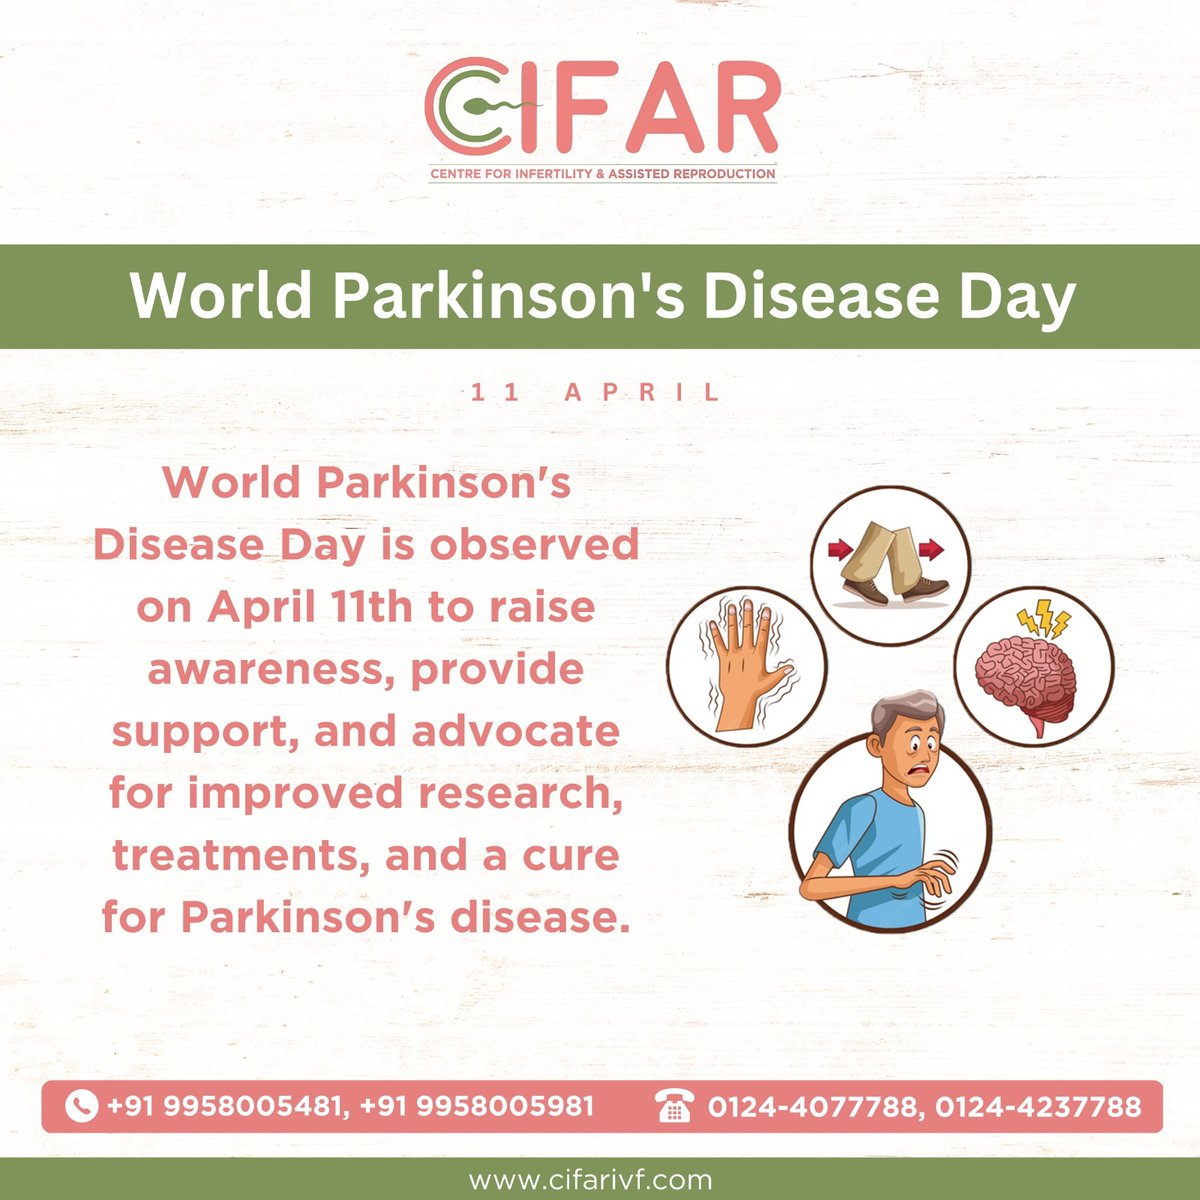 World Parkinson's Disease Day
CIFAR - Centre for Infertility & Assisted Reproduction

#Worldparkinsonsdiseaseday #Parkinsonsdisease #parkinsons #parkinsonsawareness #parkinson #stroke #parkinsonswarrior #parkinsonsfitness #dementia #Parkinsonsdiseasetreatment